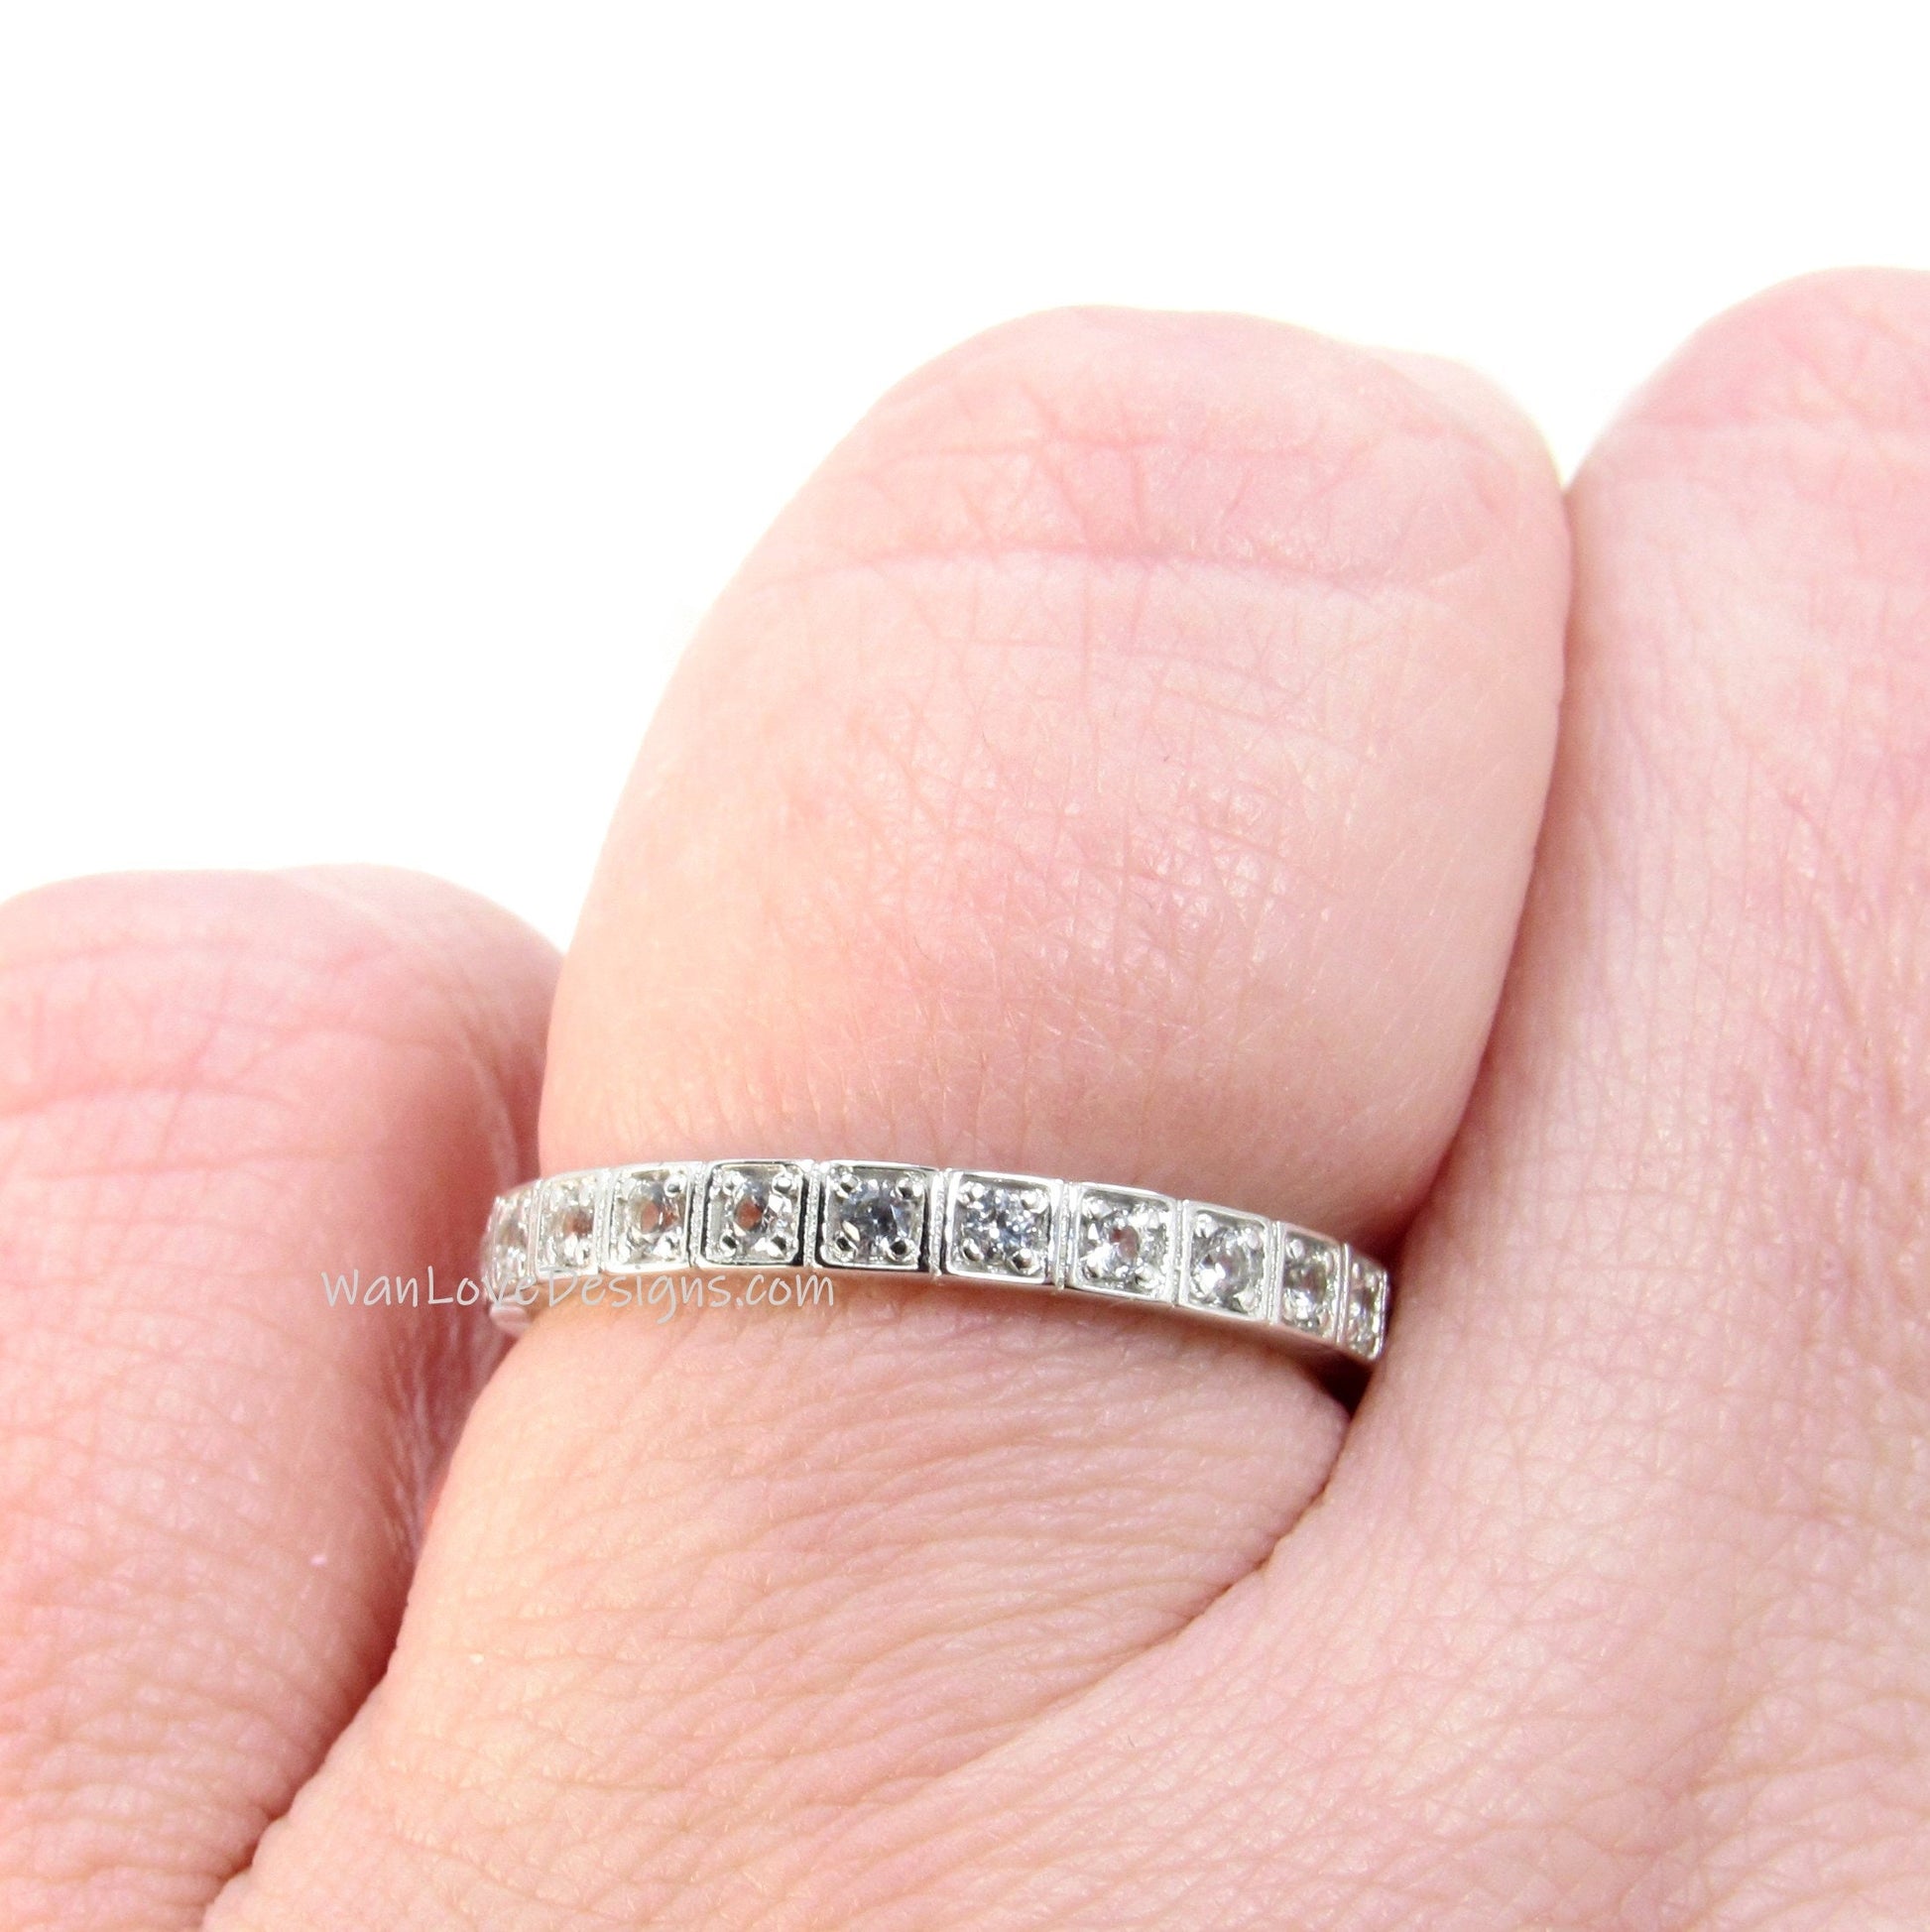 White Sapphire Almost Eternity Wedding Band Ring, Square Modern Band for Her, Custom, White Gold, Anniversary Gift, Ready to Ship